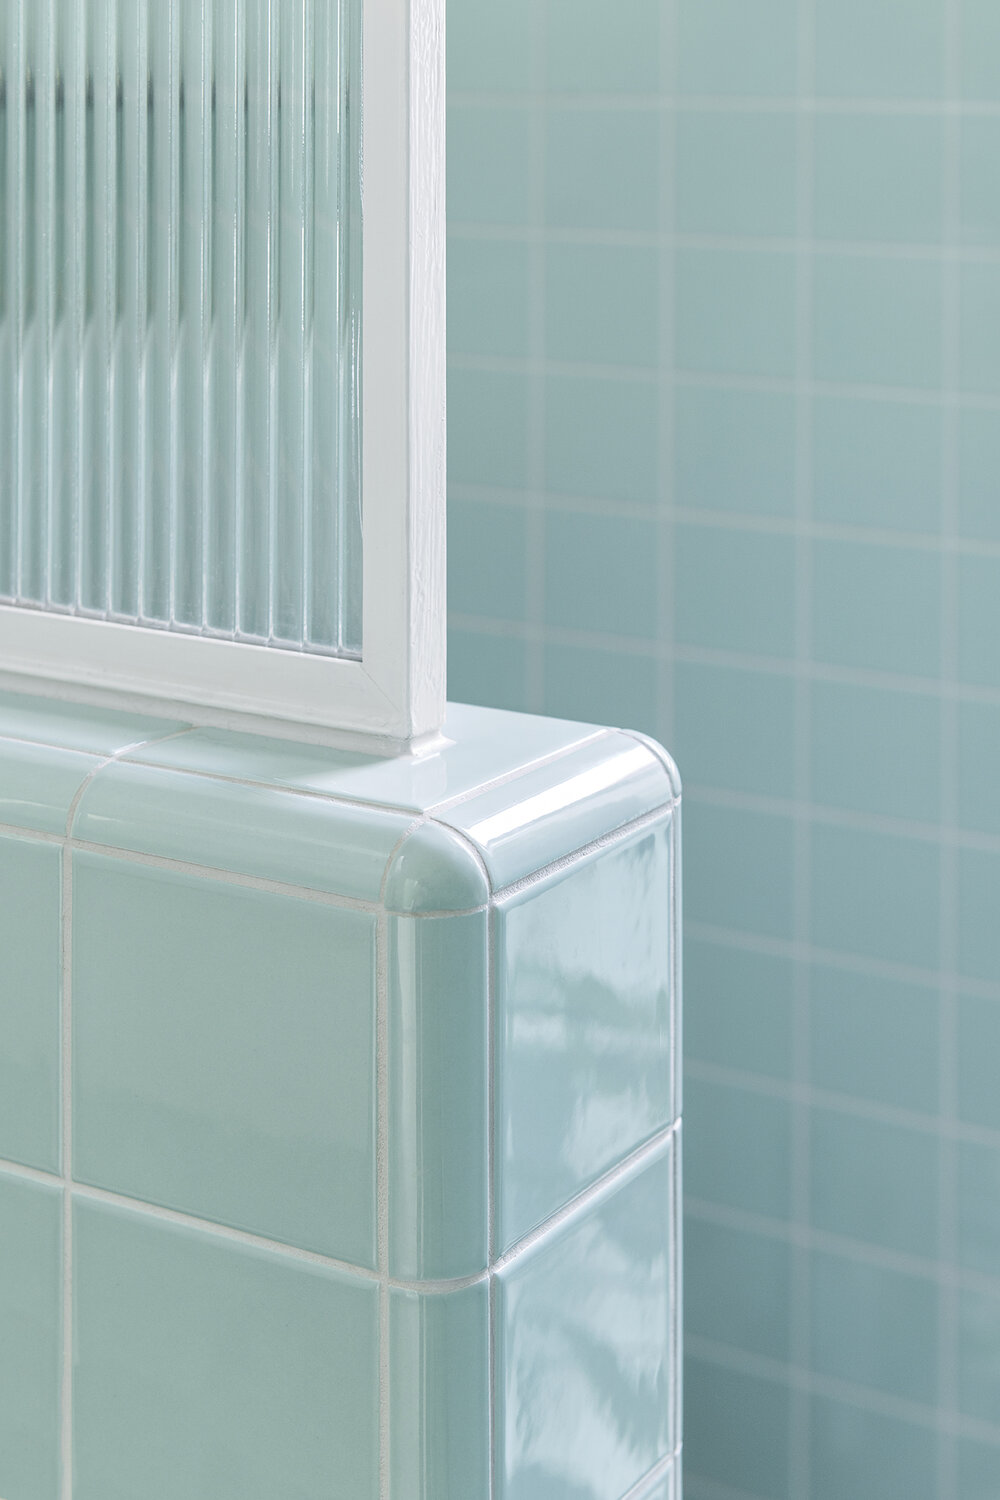 Tiling details and fluted glass screen. Image: Cathy Schusler